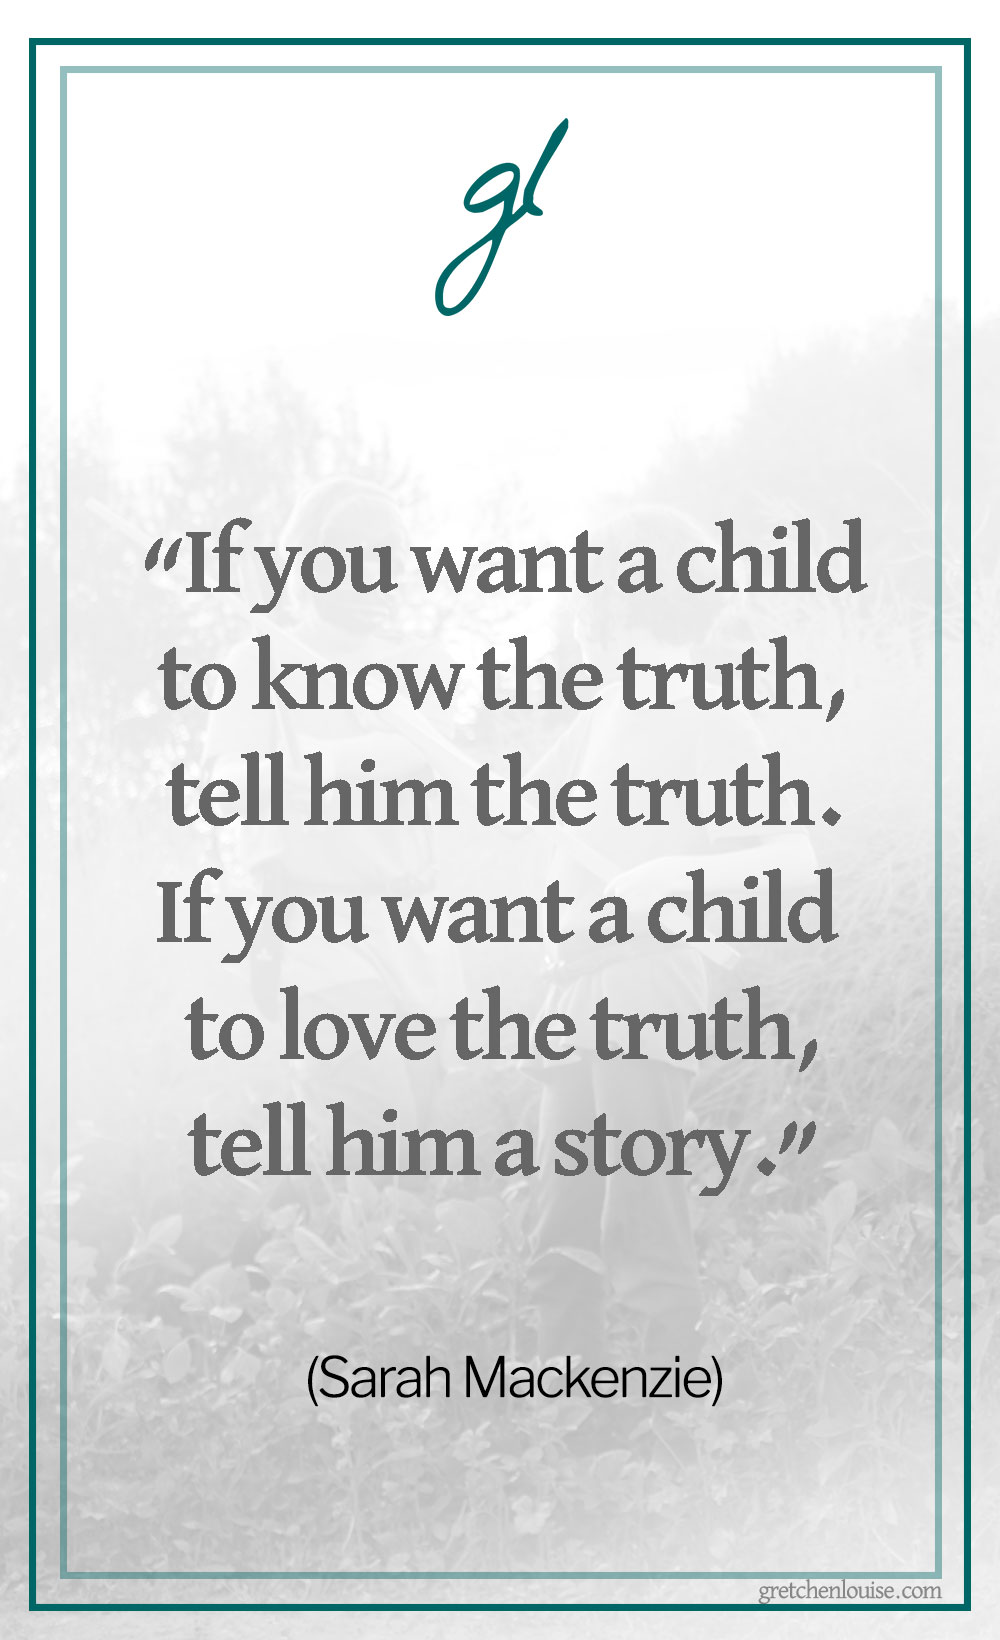 “If you want a child to know the truth, tell him the truth. If you want a child to love the truth, tell him a story.” (Sarah Mackenzie, The Read-Aloud Family)